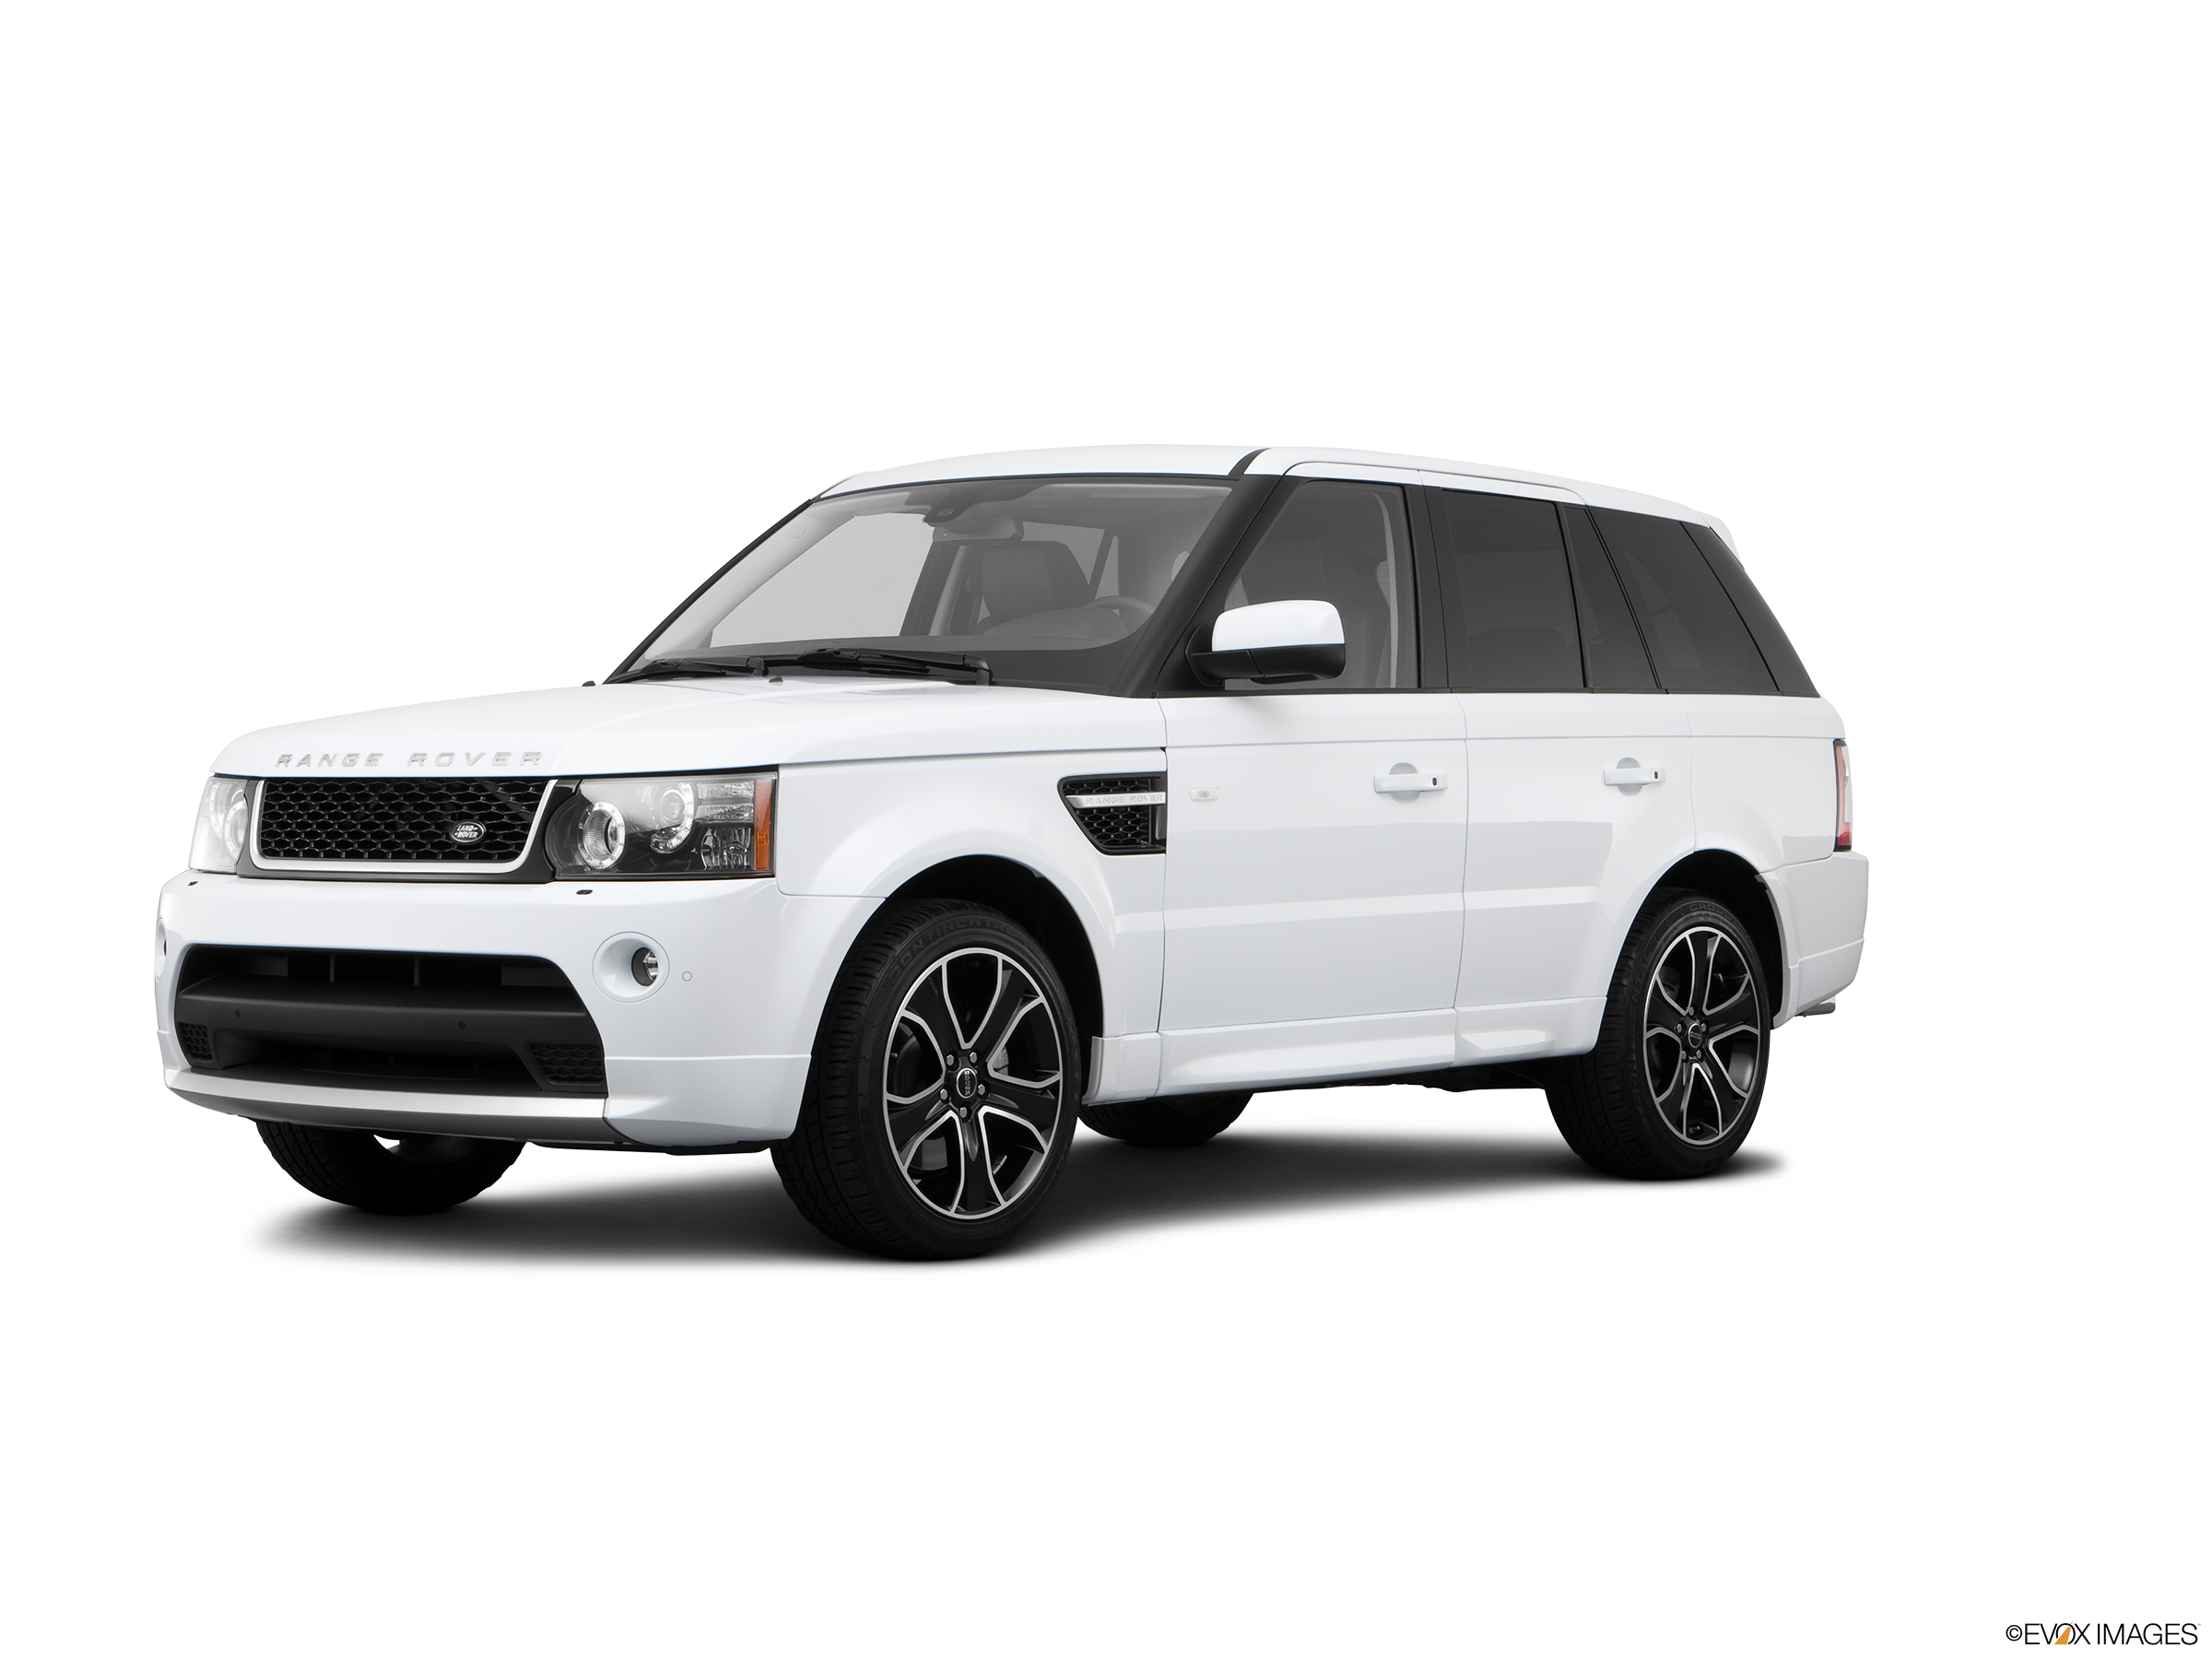 2013 Land Rover Range Rover Prices Reviews and Photos  MotorTrend